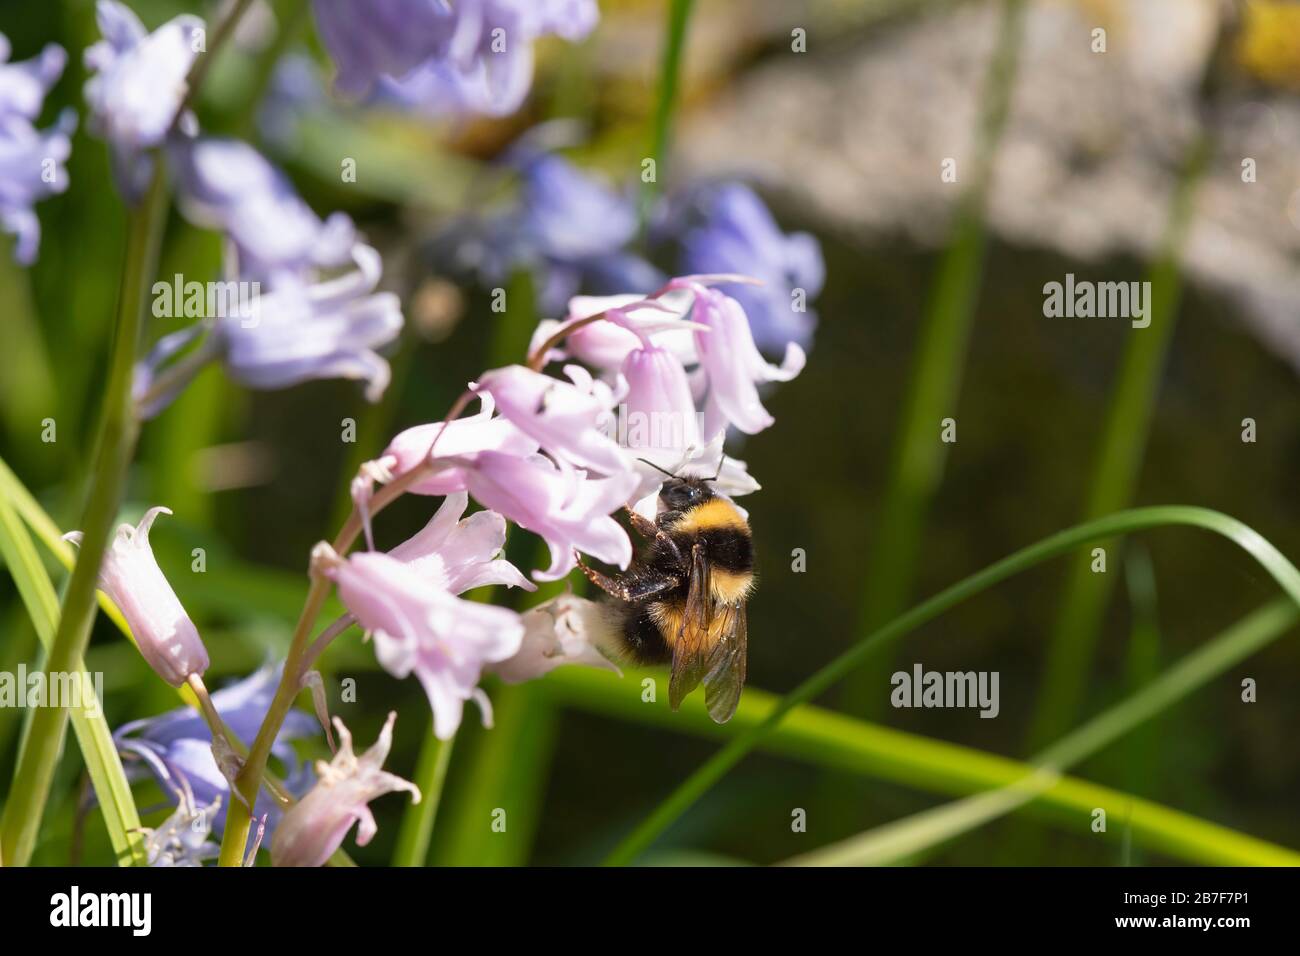 A Garden Bumblebee (Bombus Hortorum) Immersing Itself in the Flower of a Pink Native Bluebell (Hyacinthoides Non-Scripta) in Sunshine Stock Photo